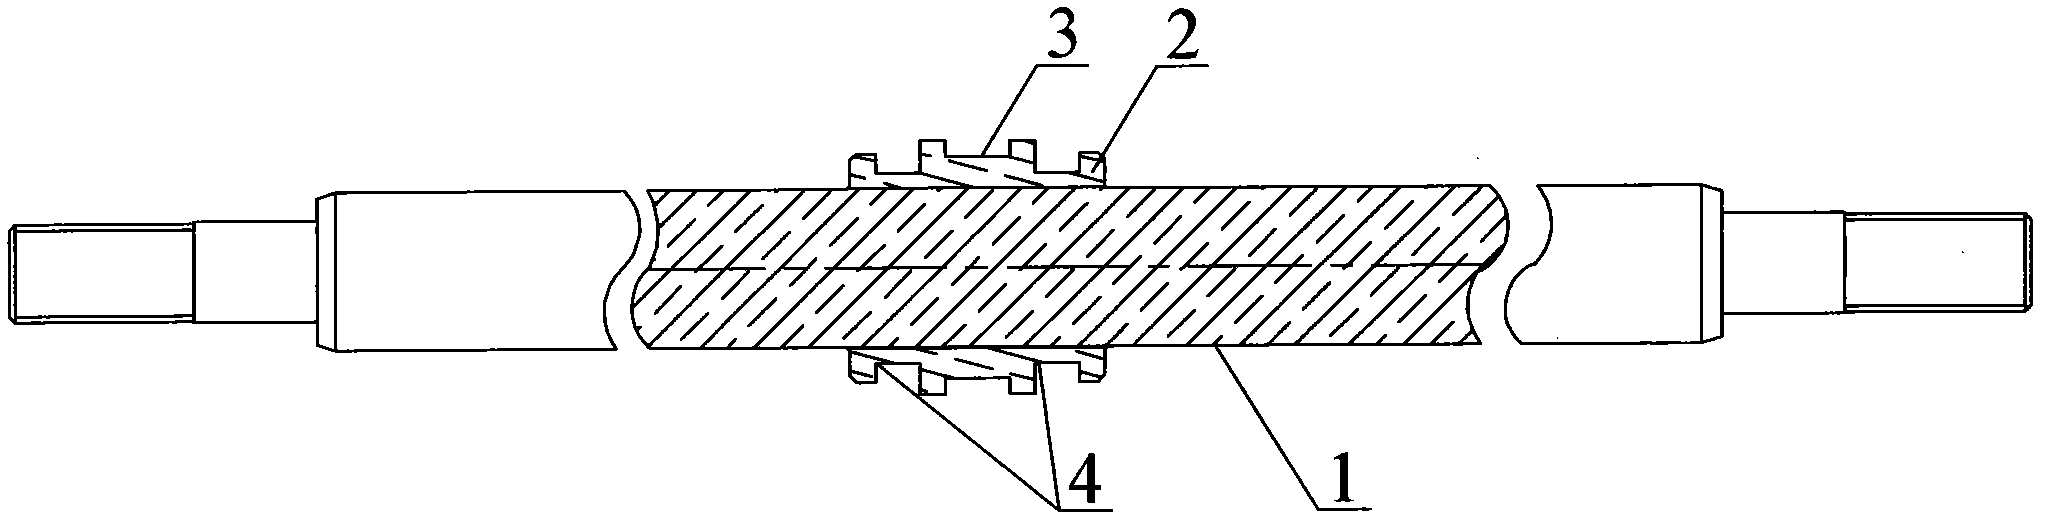 Connecting structure and installation method for piston and piston rod